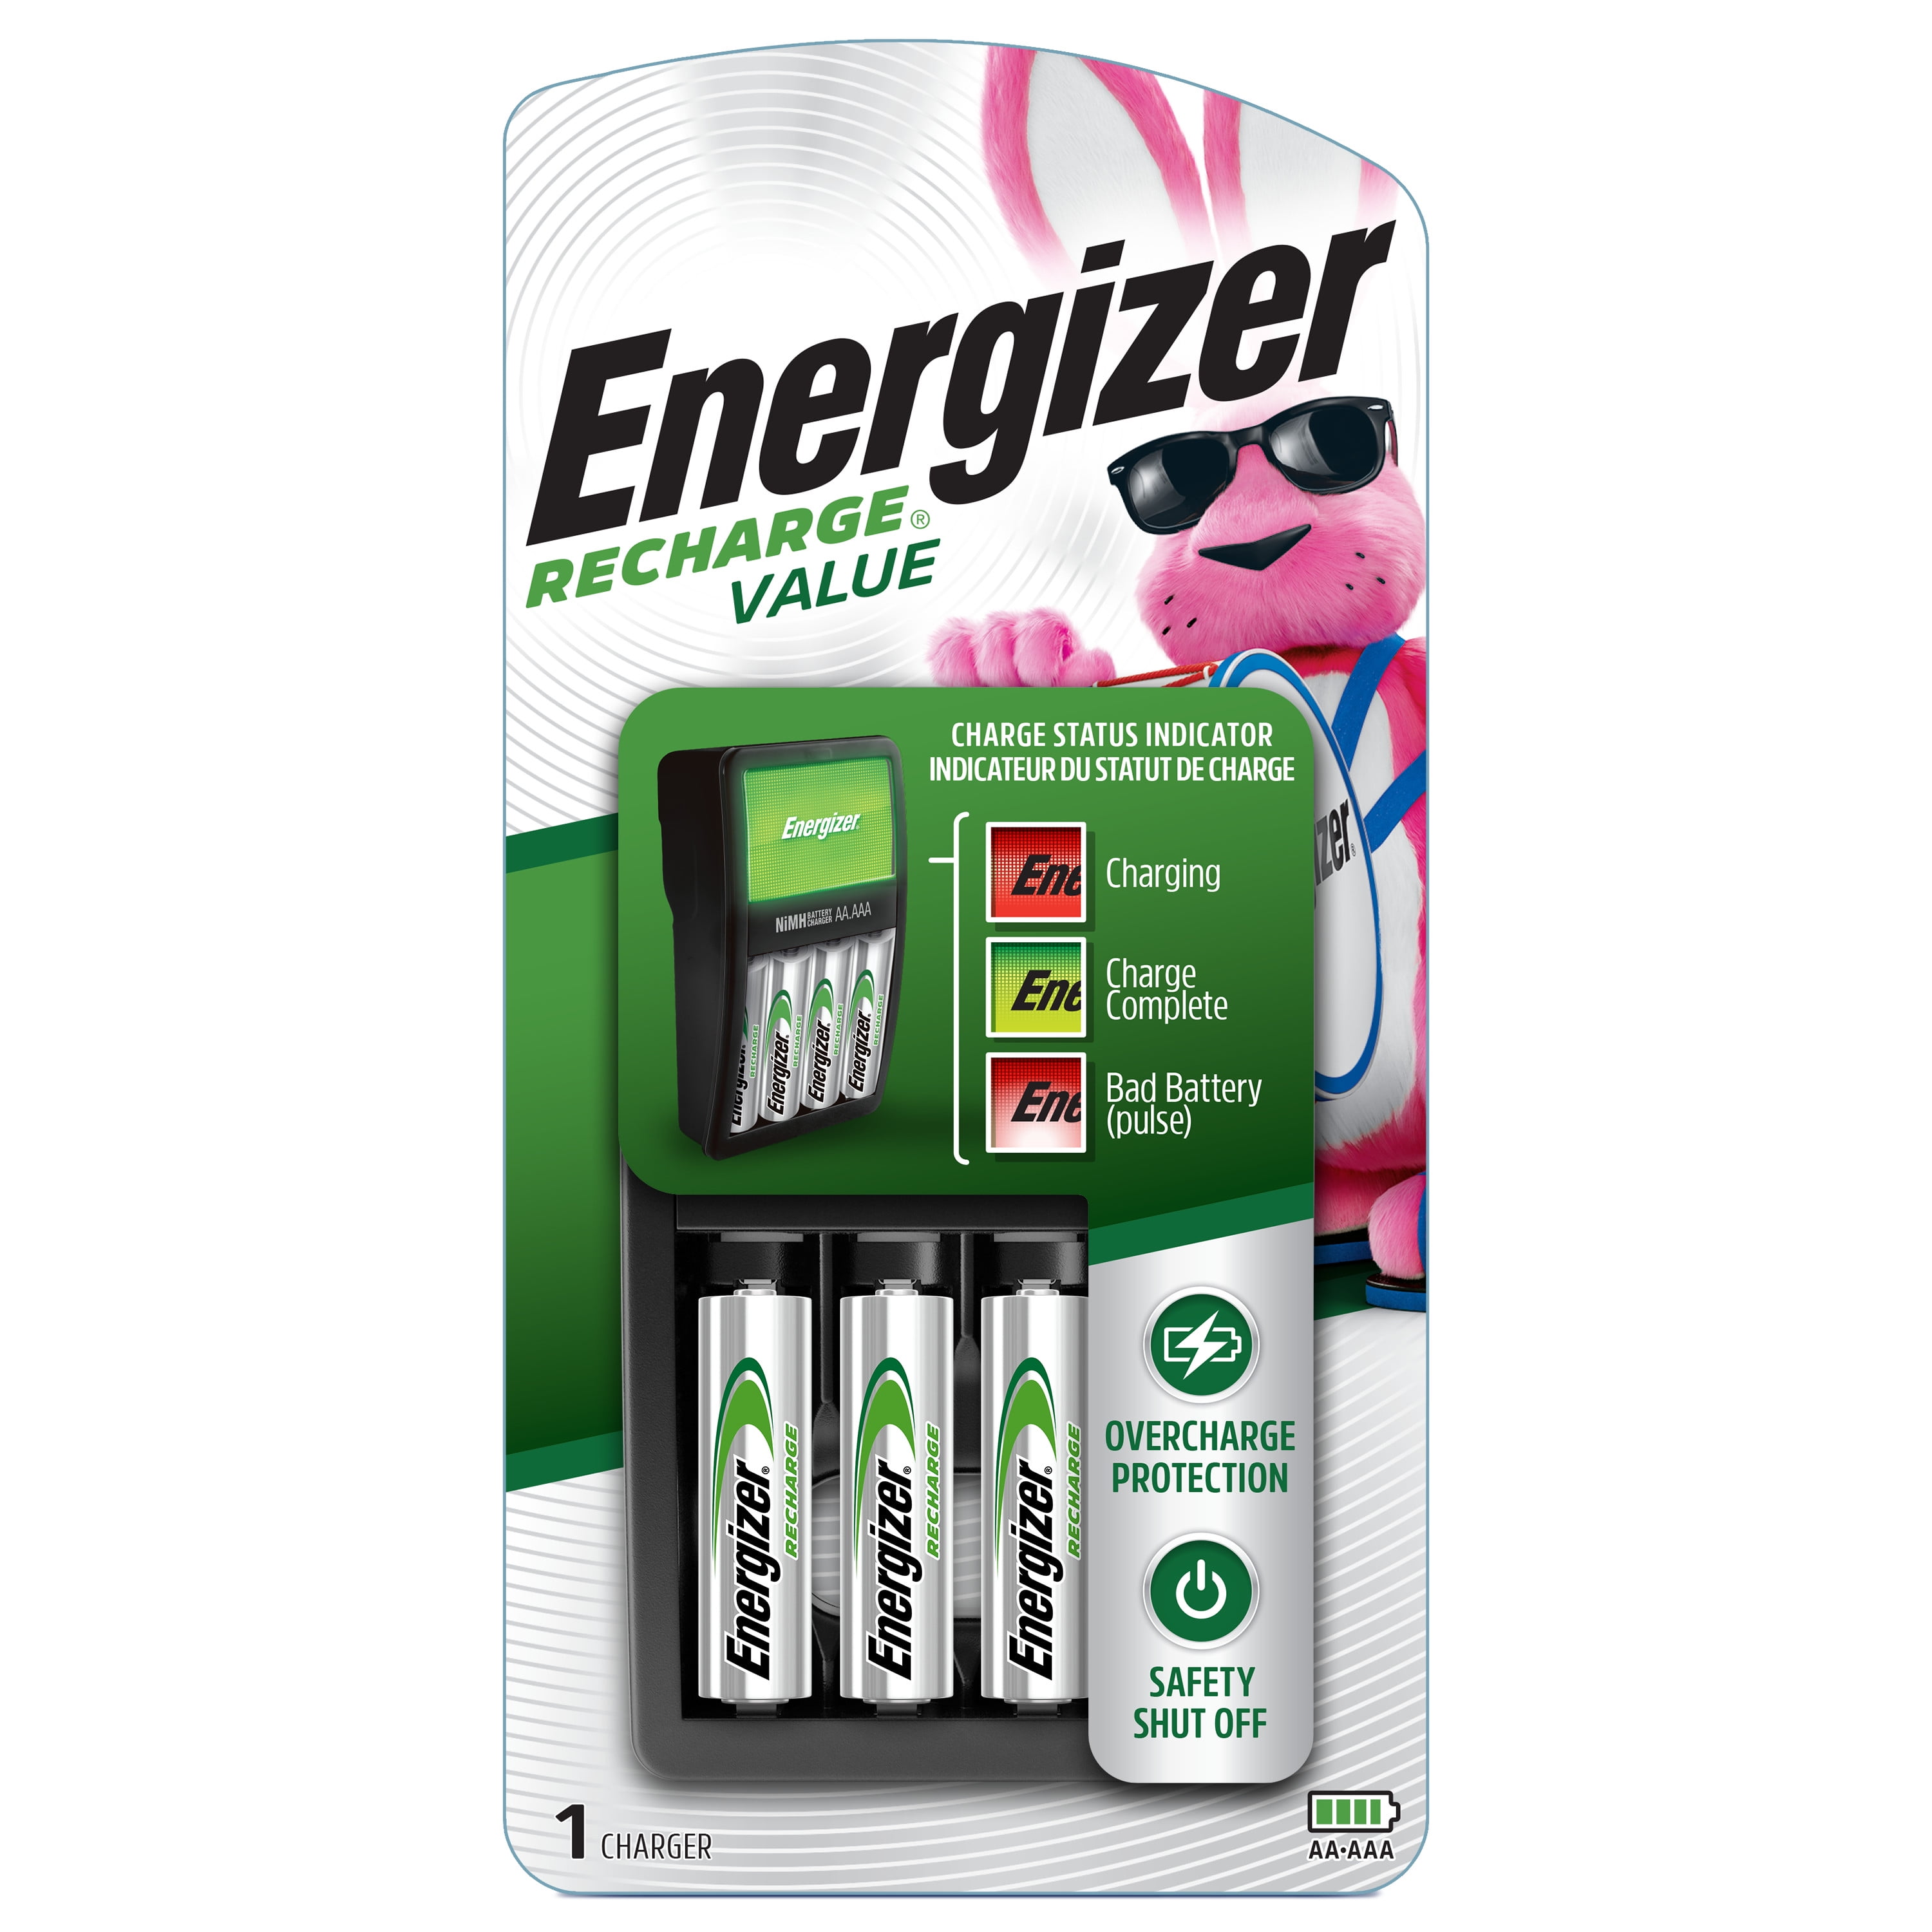 Energizer Rechargeable AA and AAA Battery Charger Recharge Pro w/ 4 AA NiMH 